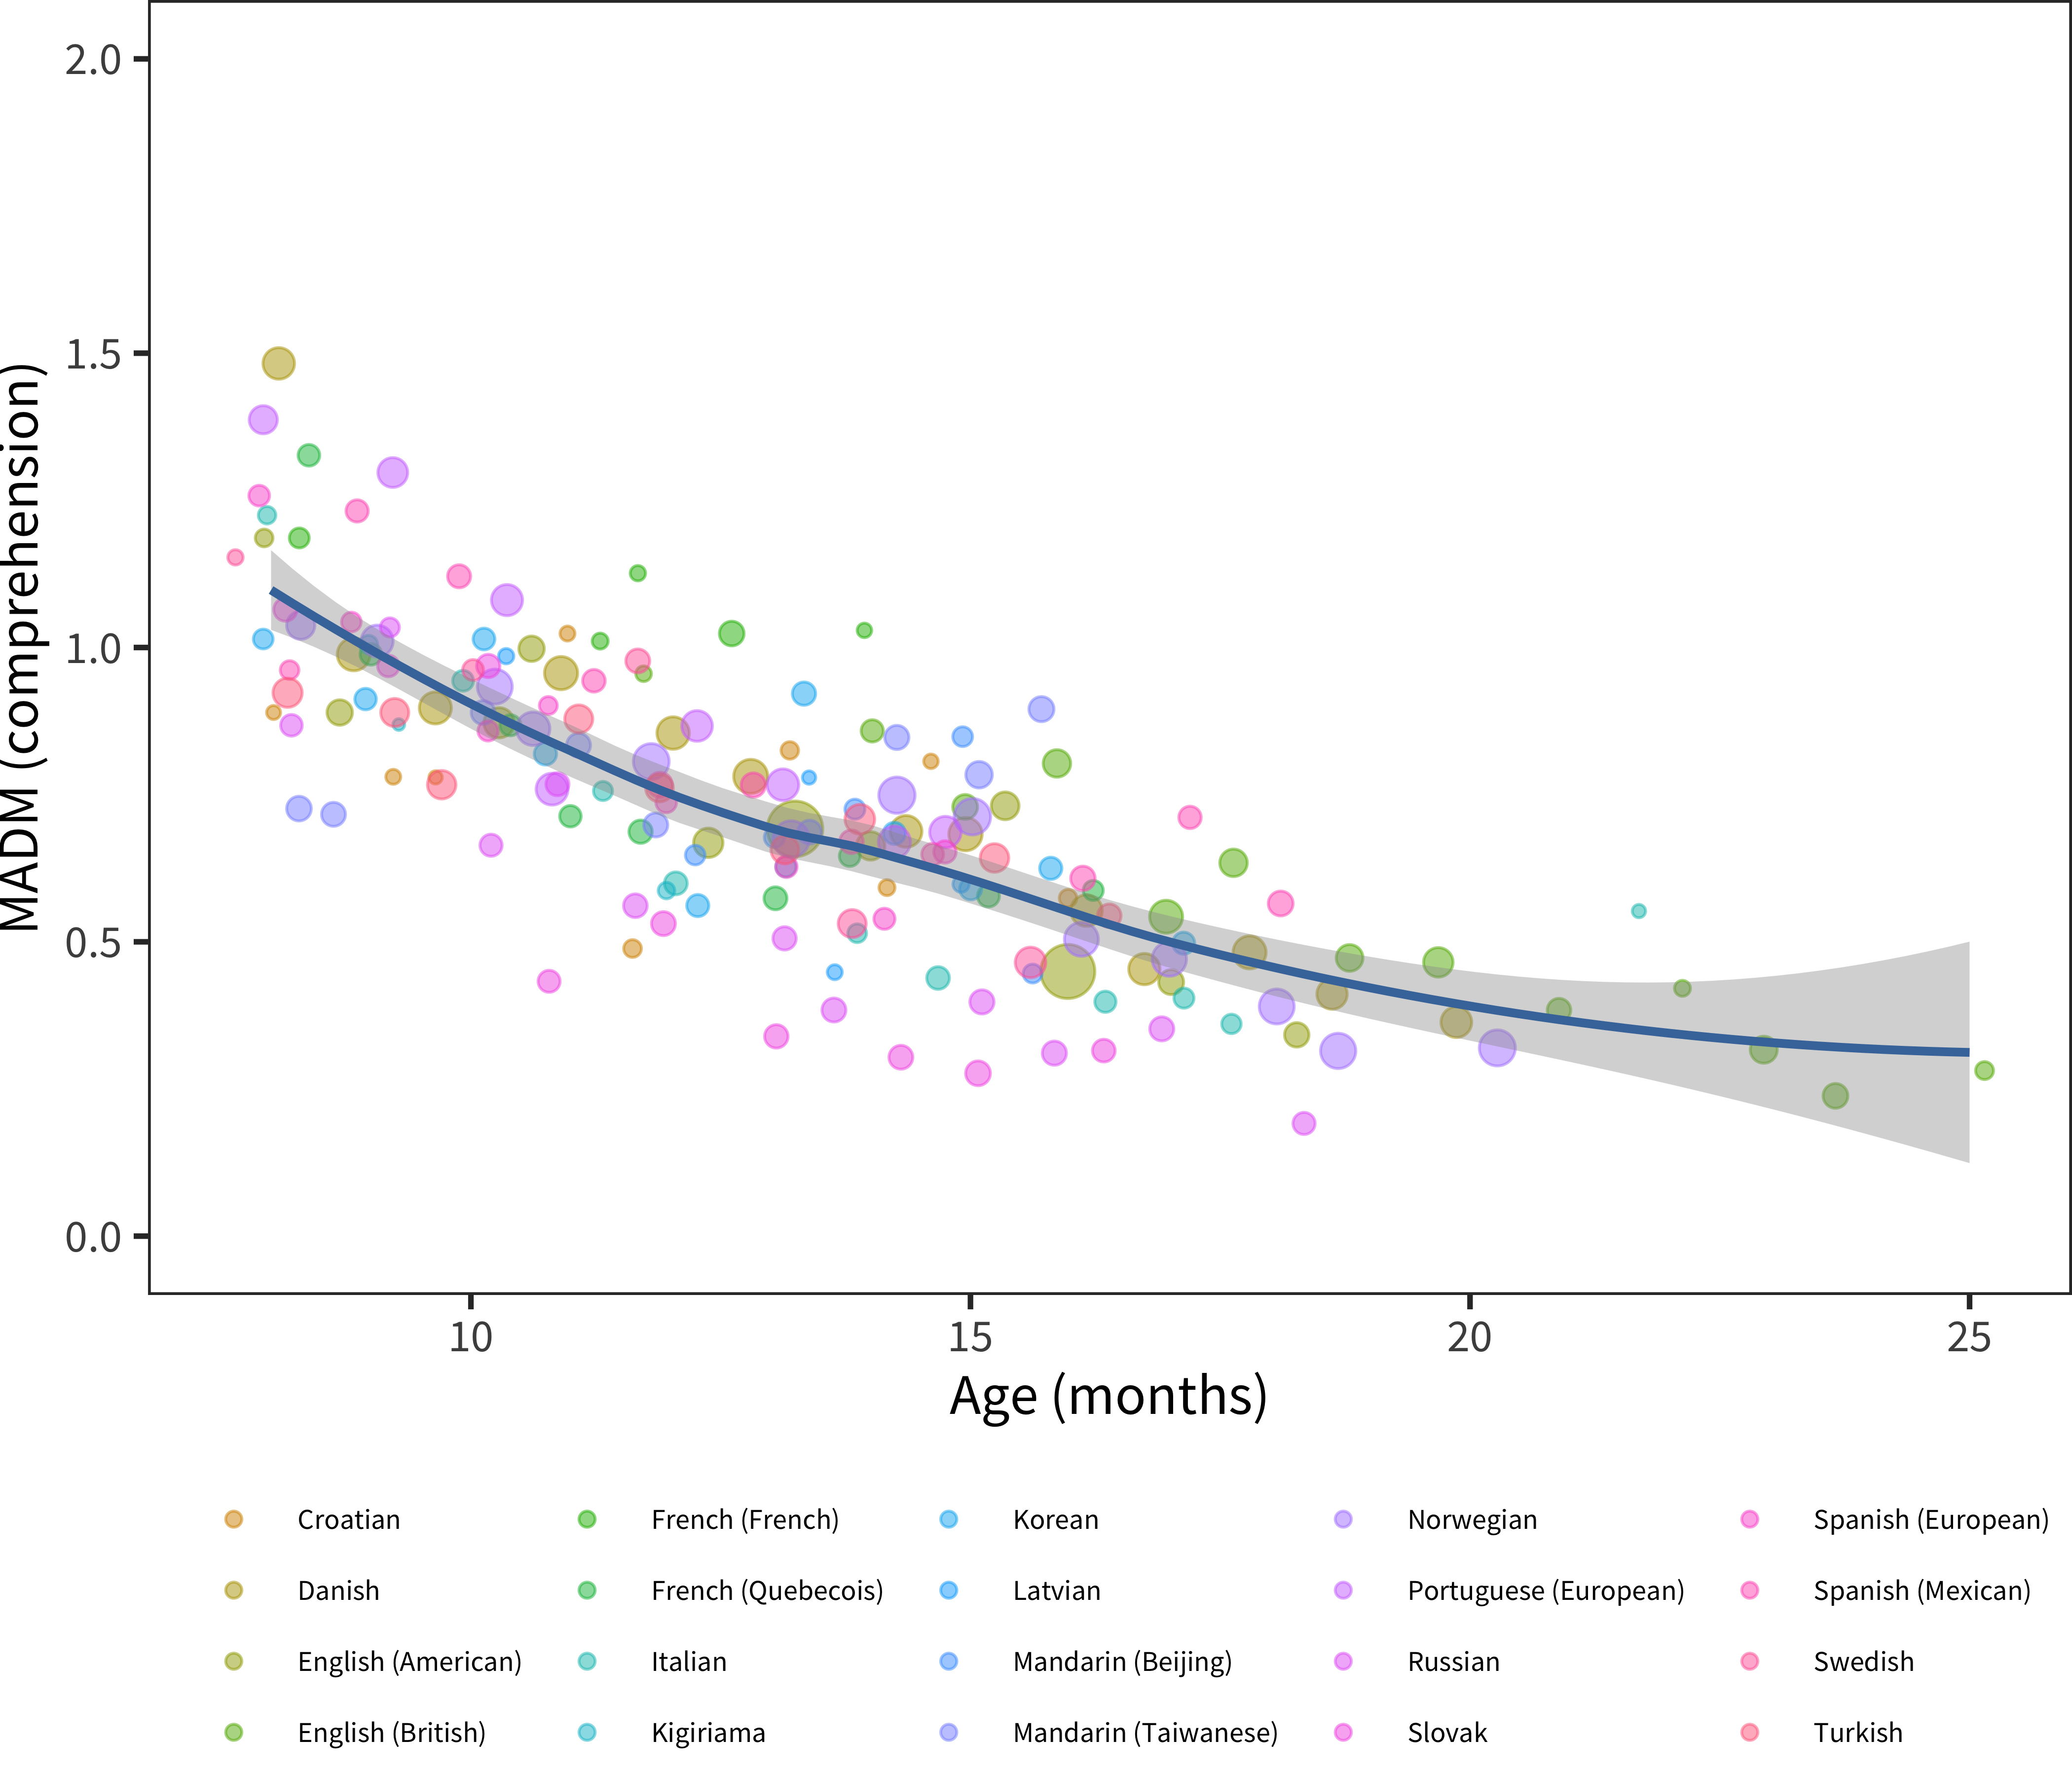 MADM for comprehension, plotted by age group, for the full sample of languages in our dataset.